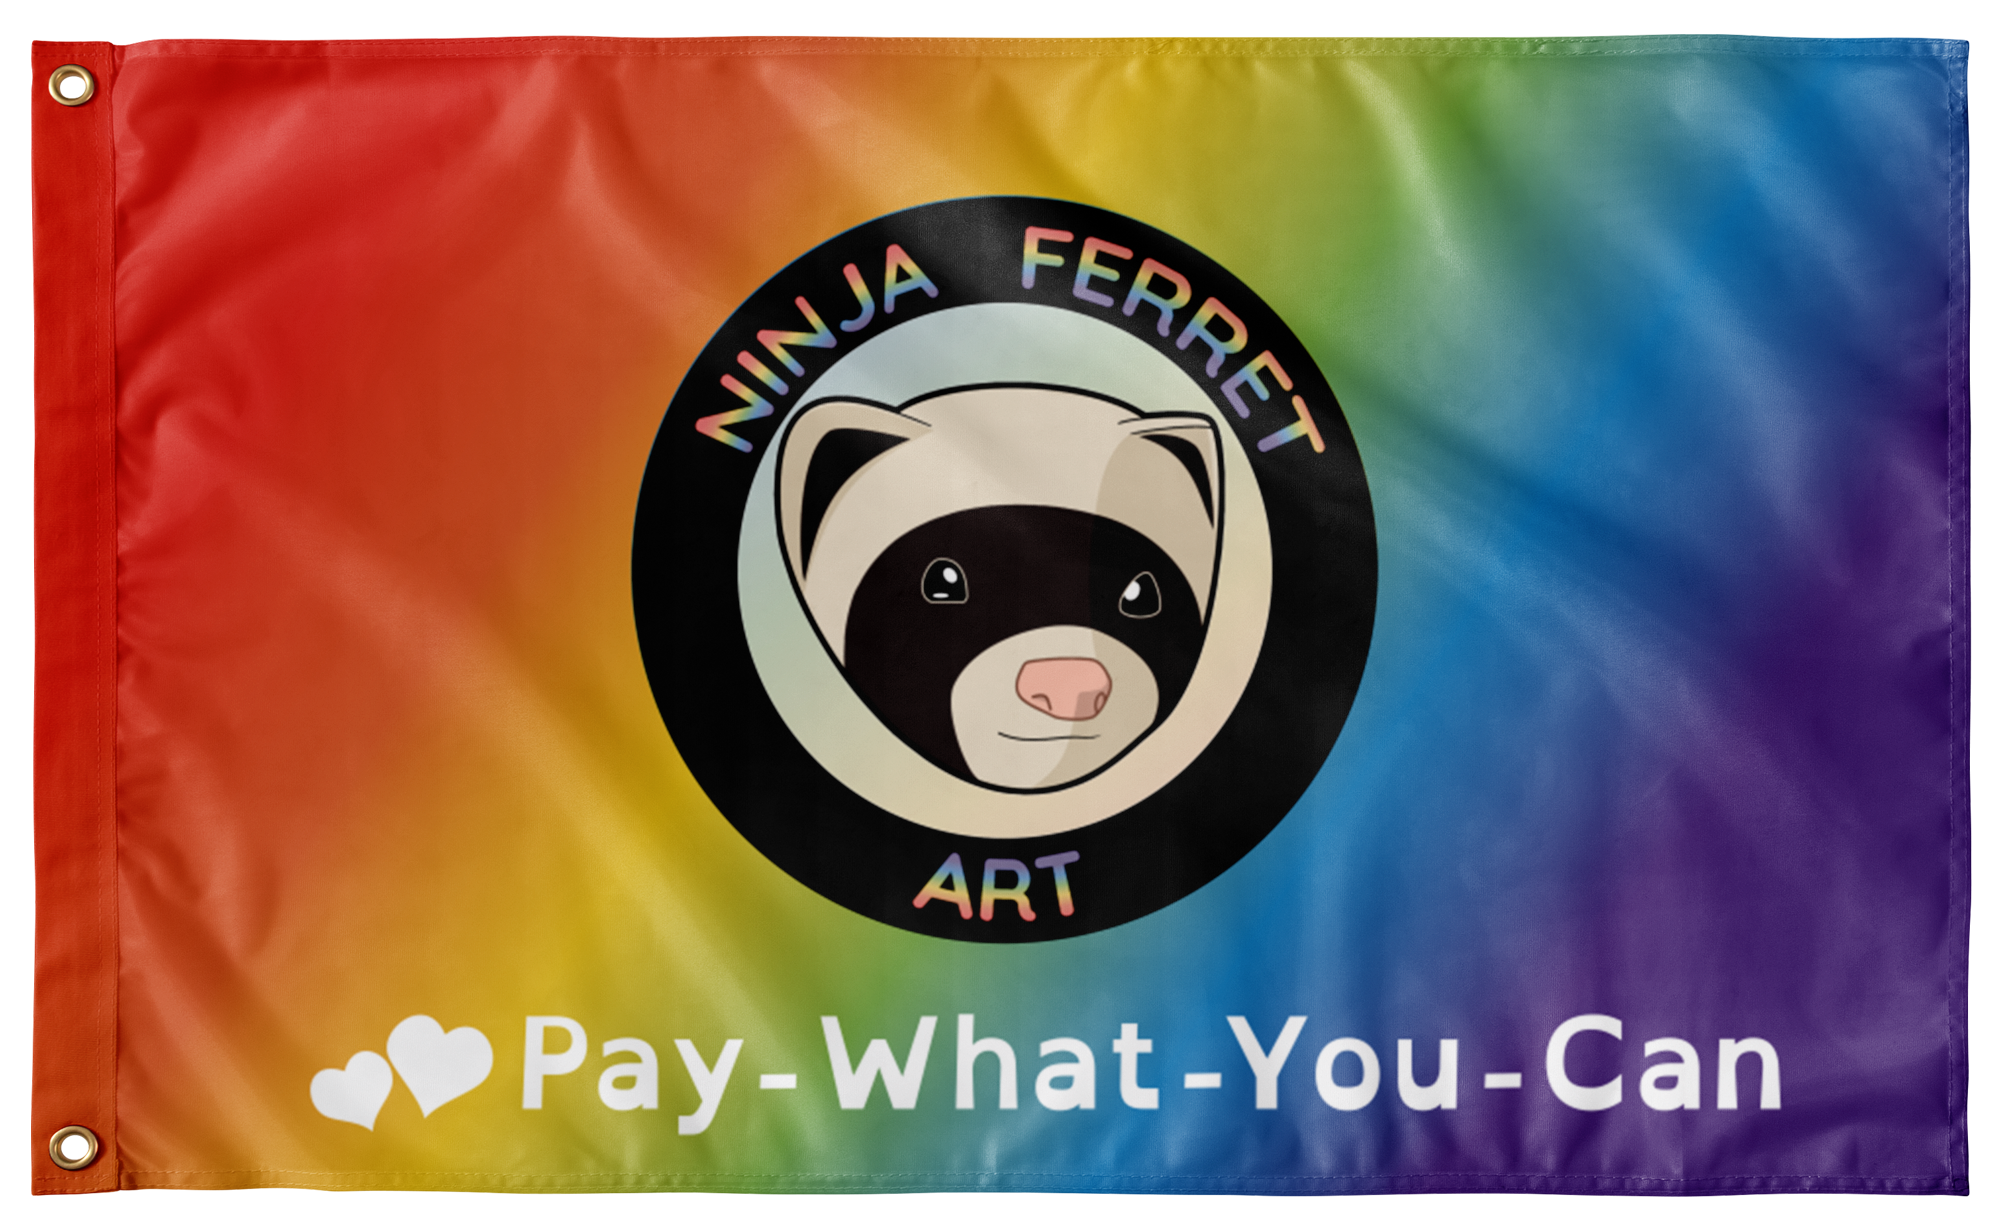 Flag with rainbow background and Ninja Ferret Logo. White text on the flag says: Pay-What-You-Can